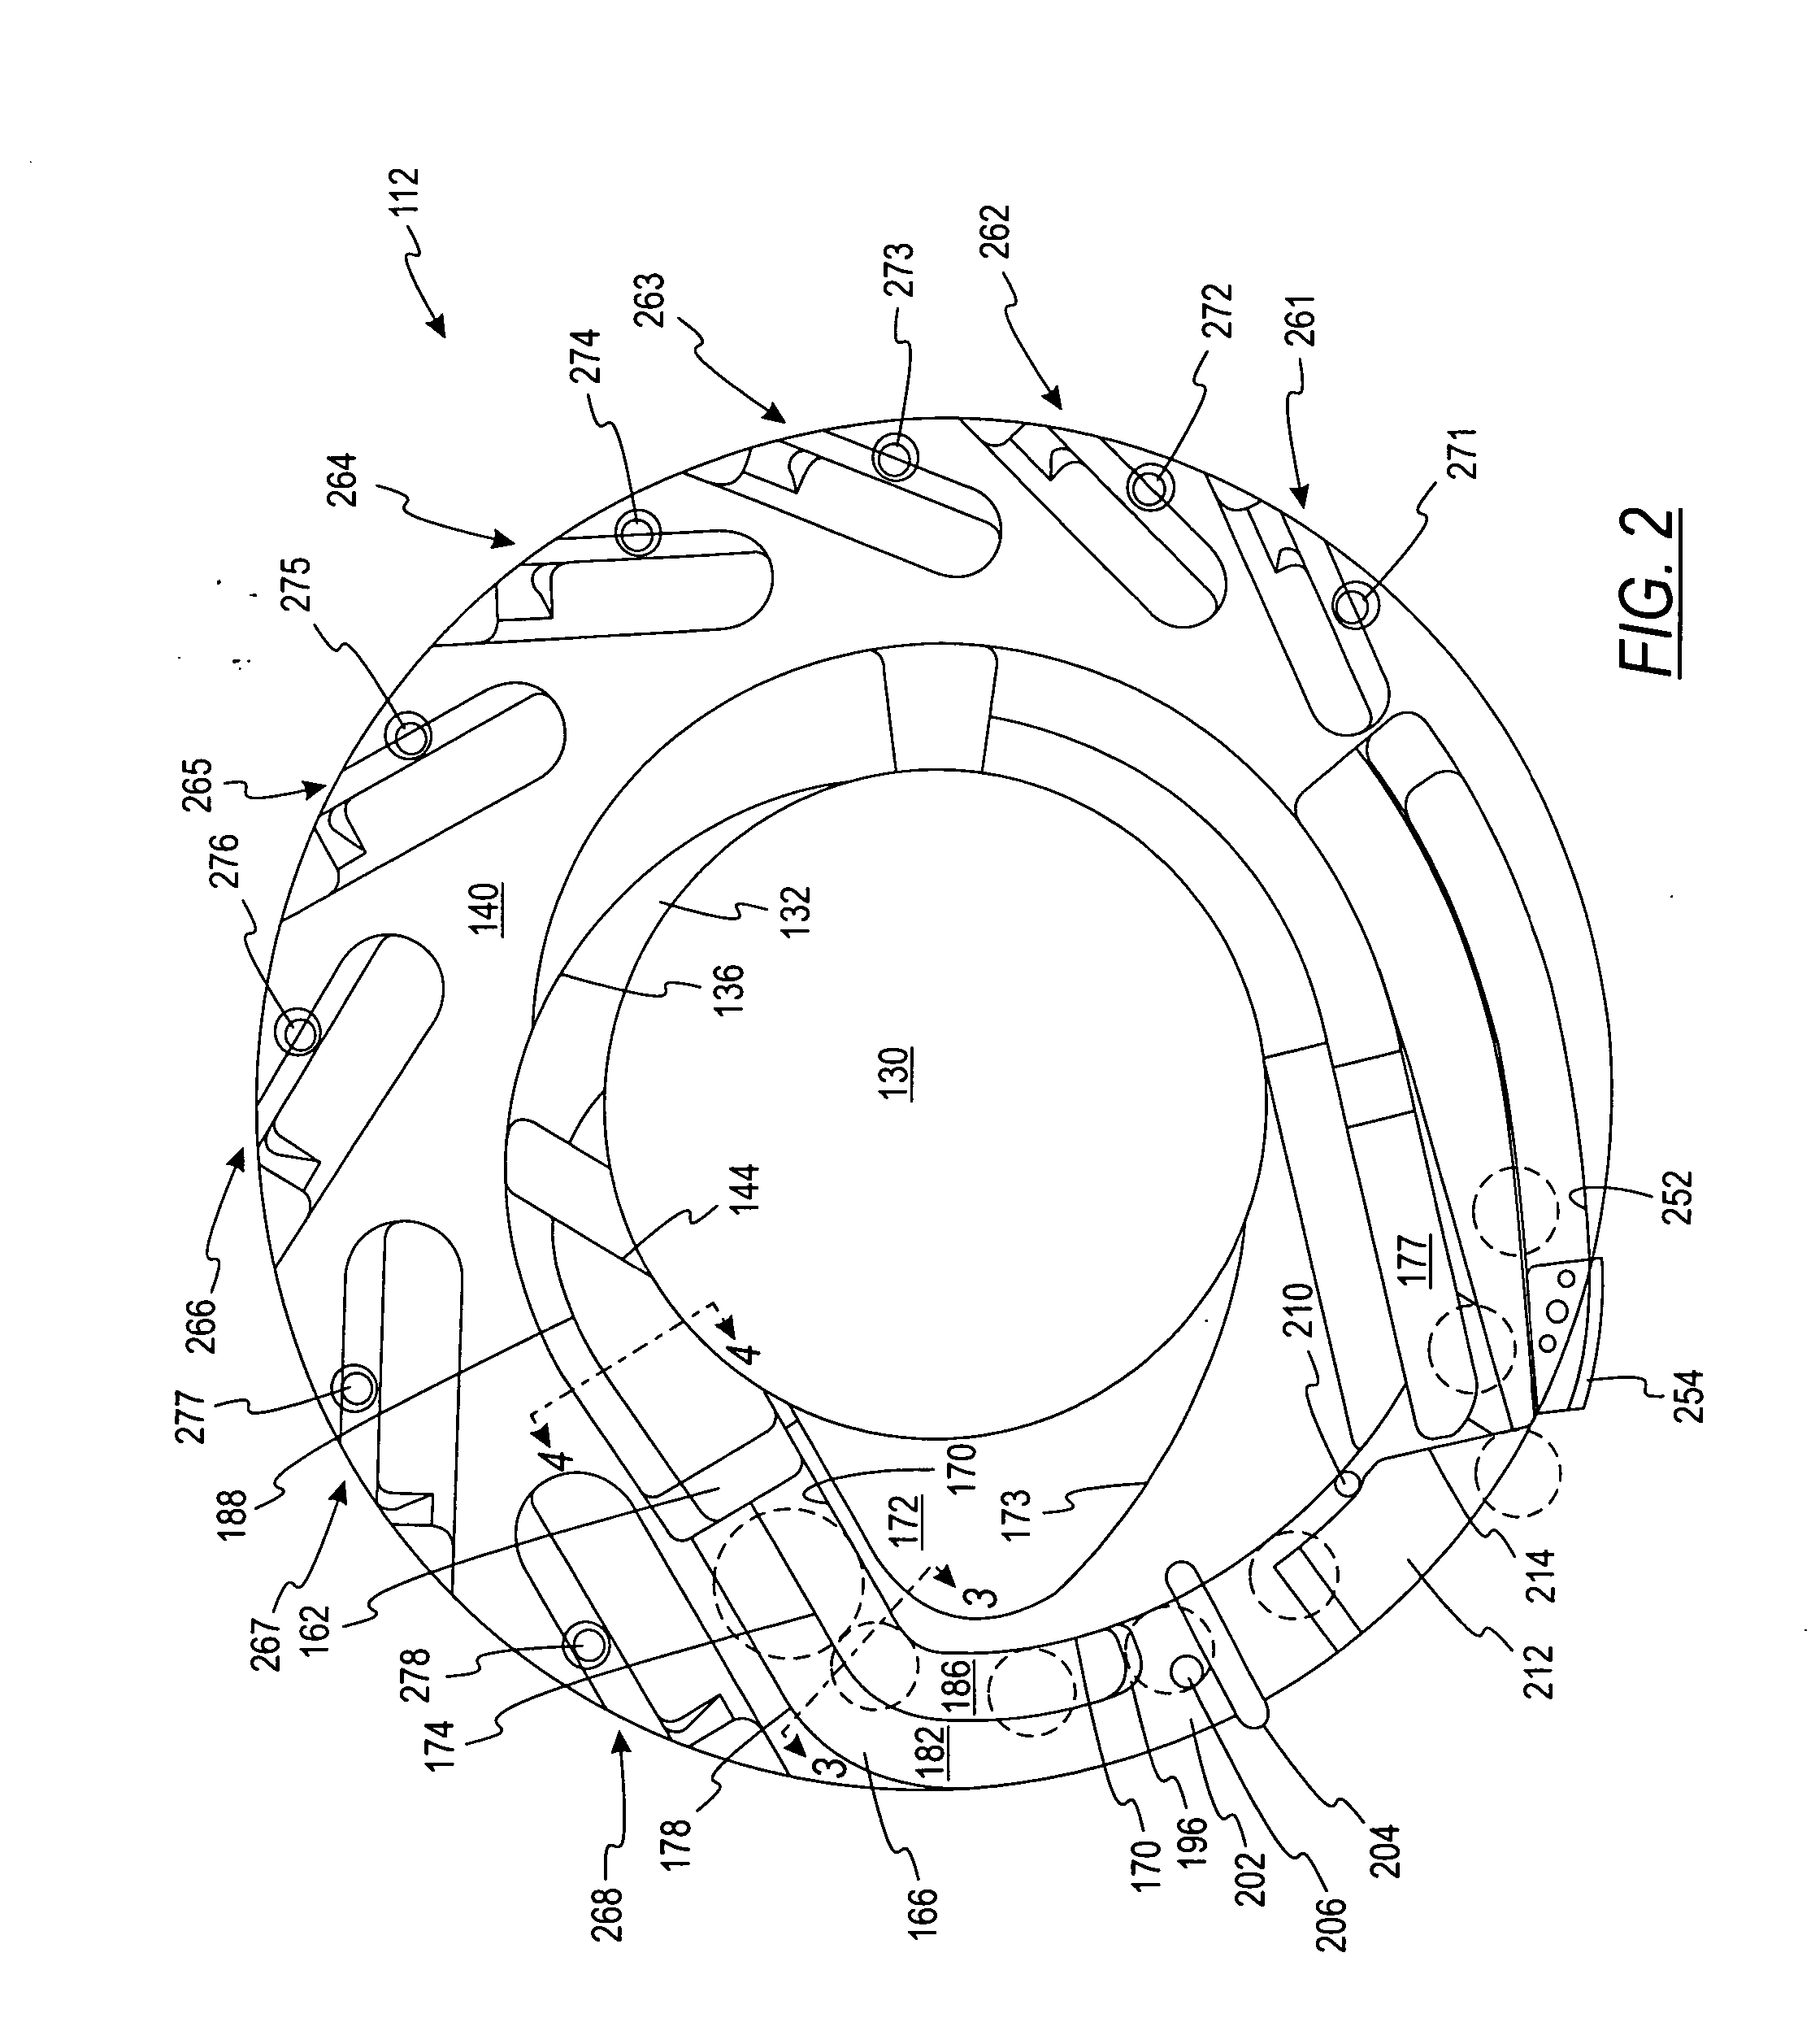 Optical coin discrimination sensor and coin processing system using the same